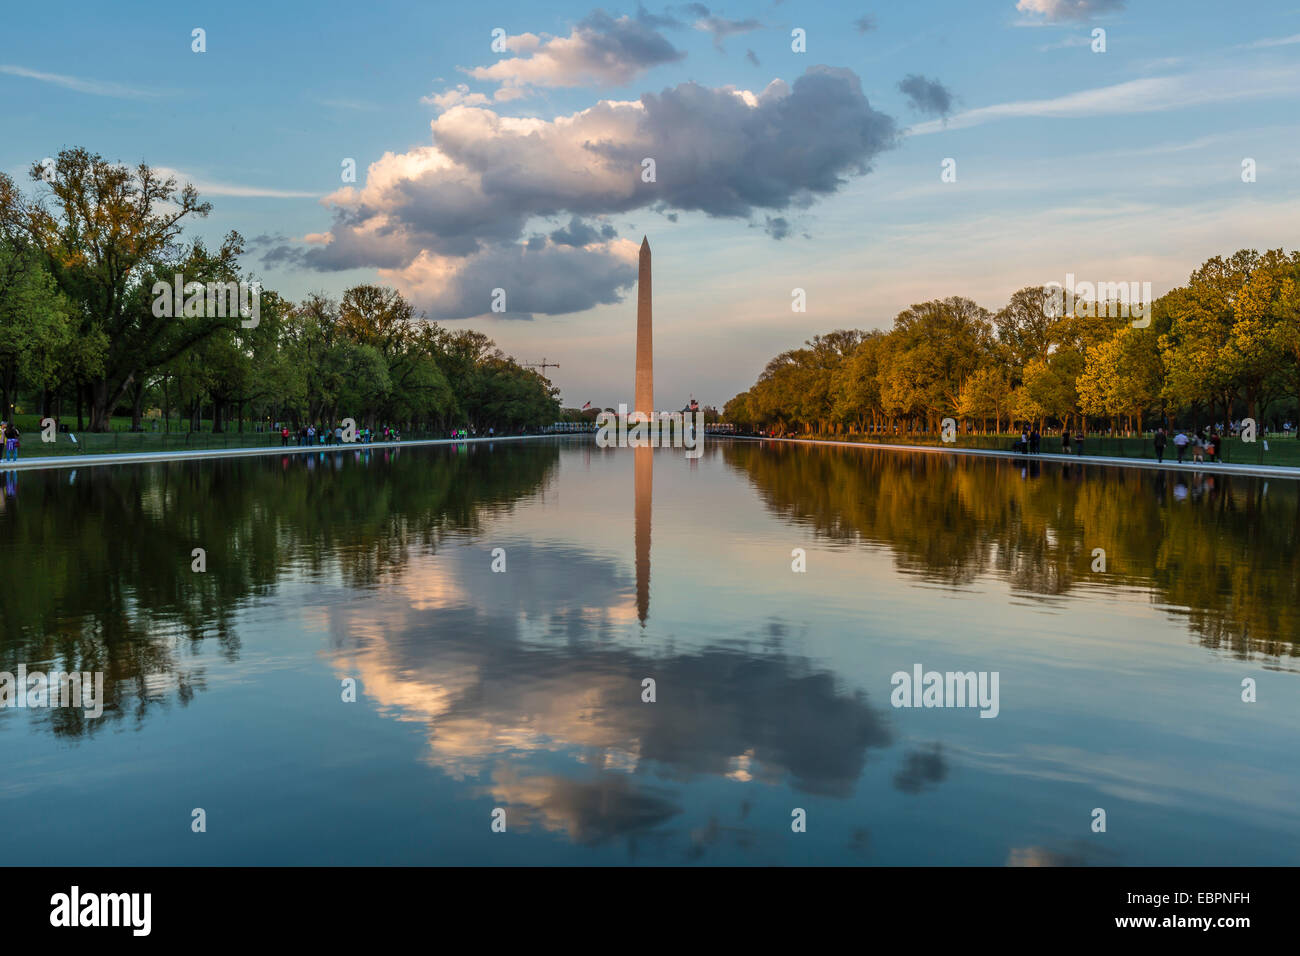 The Washington Monument with reflection as seen from the Lincoln Memorial, Washington D.C., United States of America Stock Photo